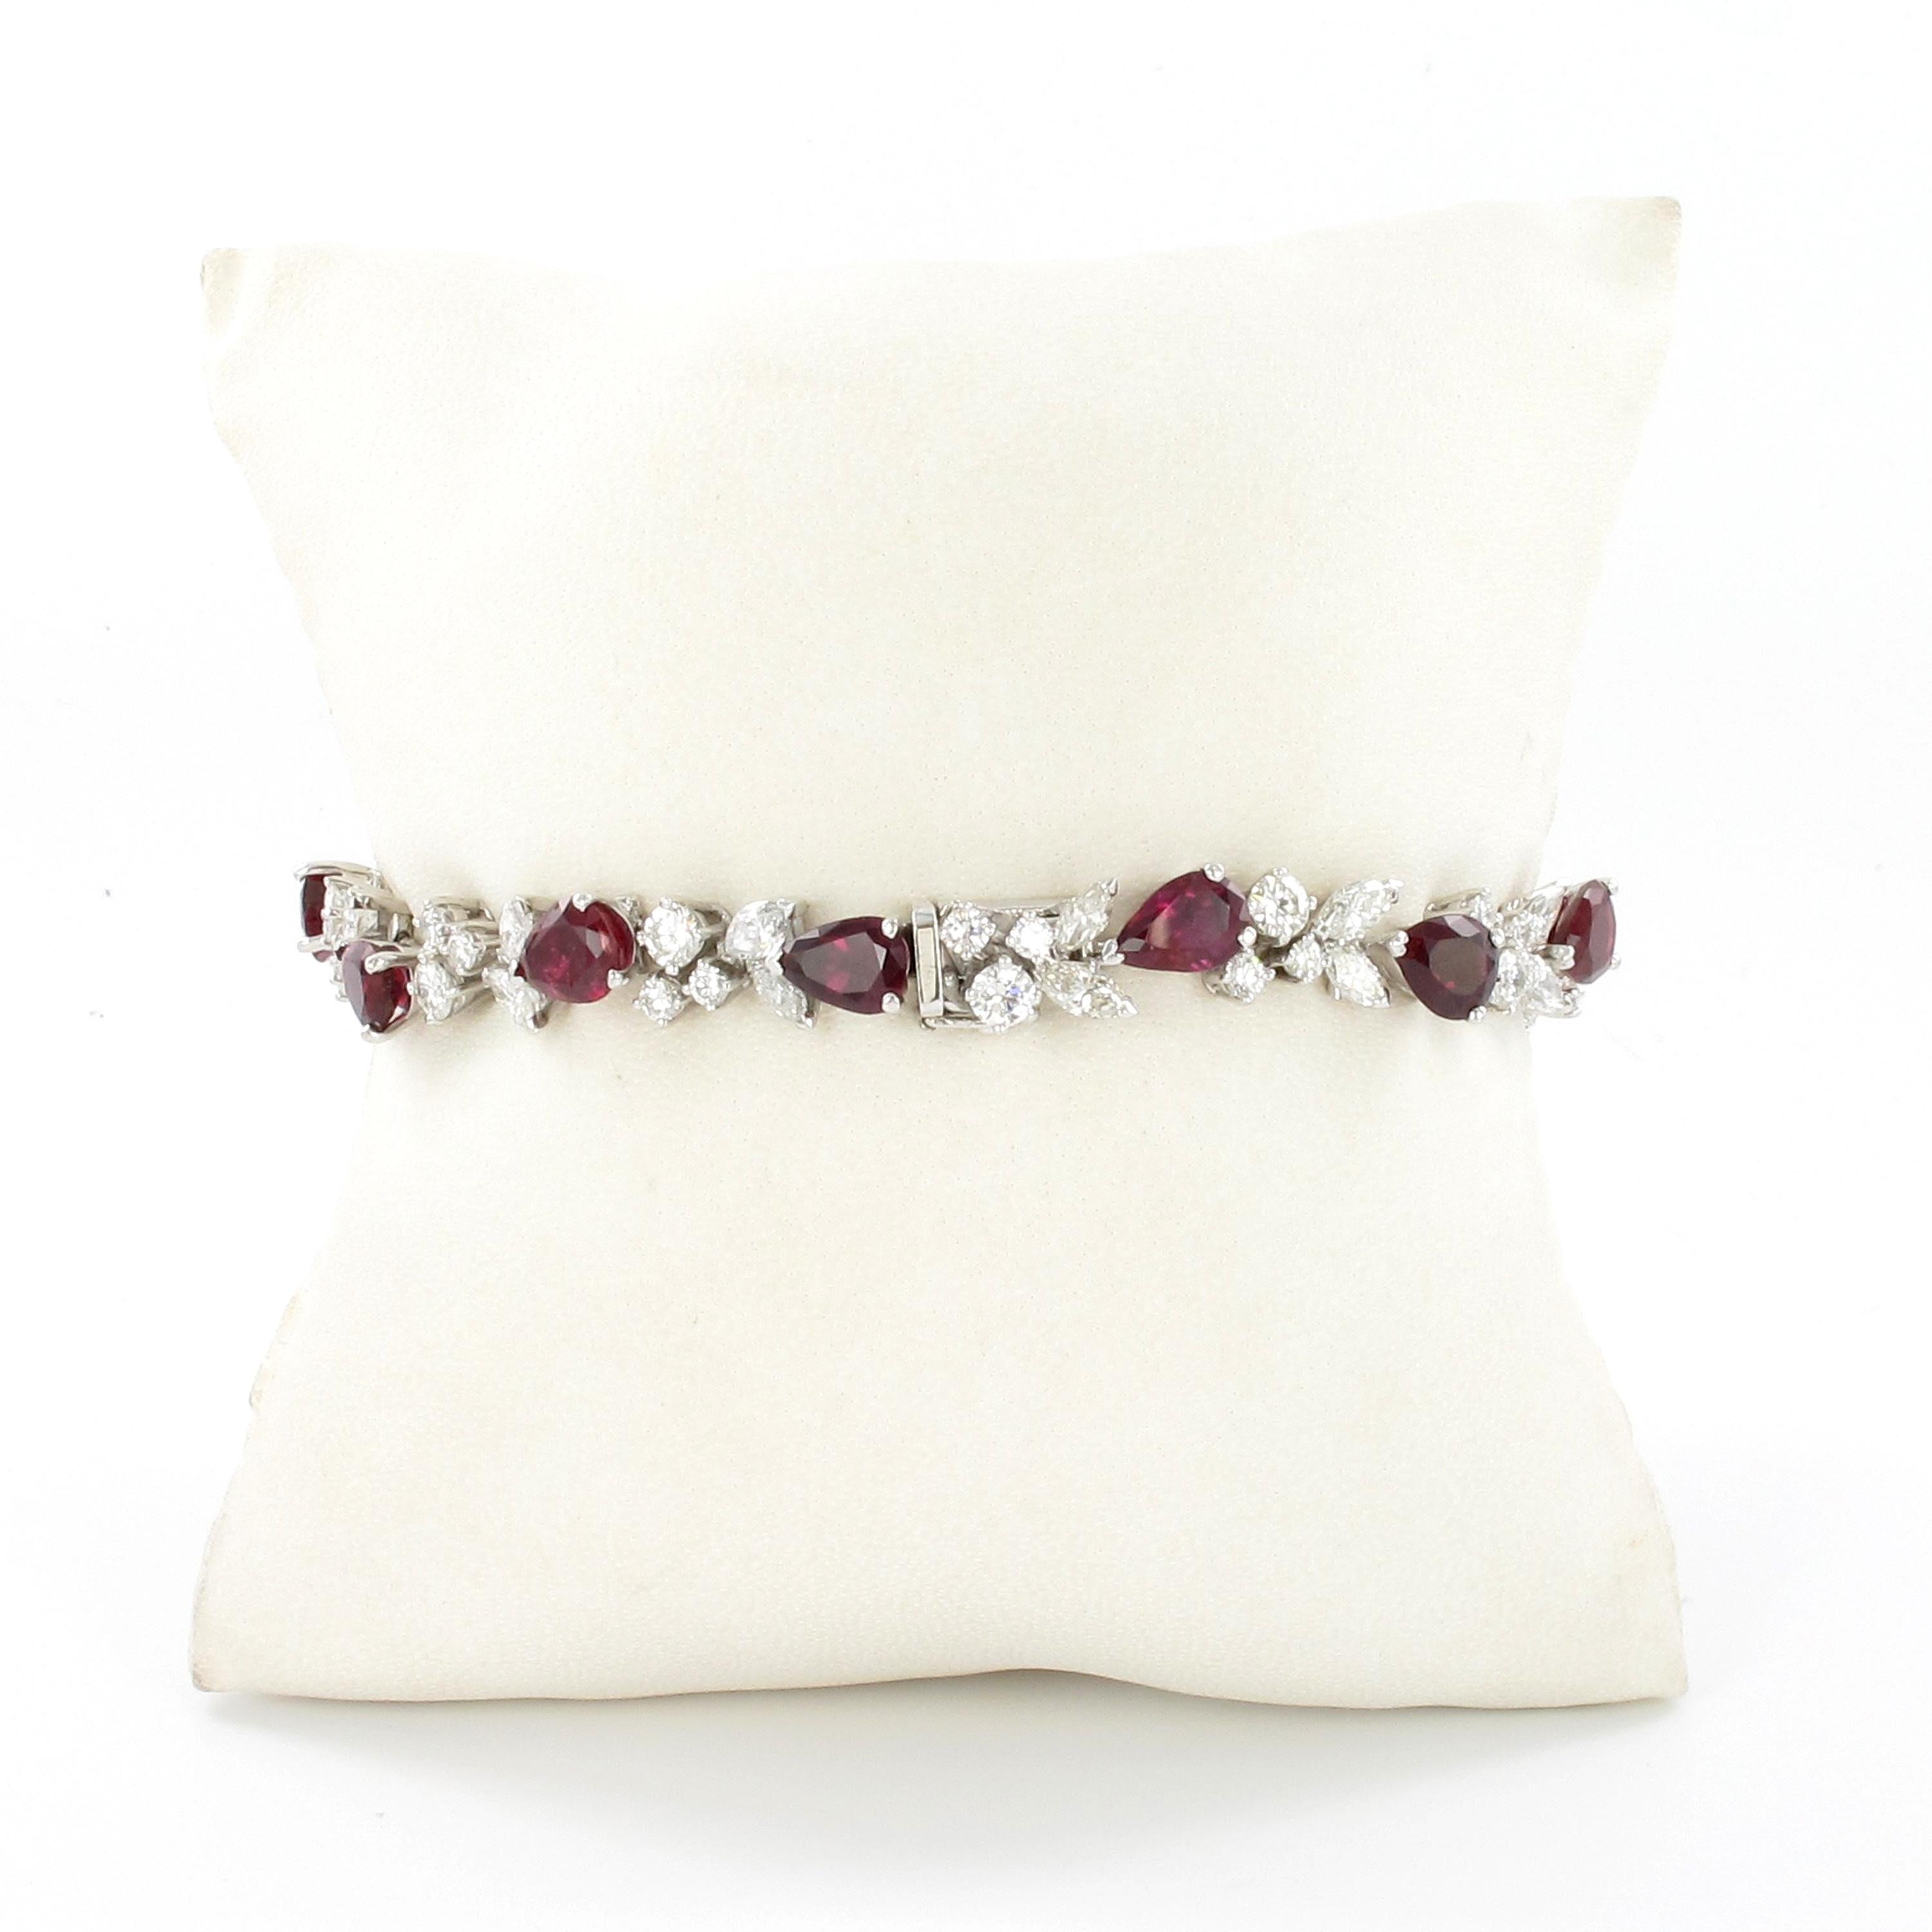 This beautiful and timeless bracelet by Swiss jeweller Gübelin is set with 12 pear-shaped rubies of intense colour, total weight approximately 9.50 carats. The rubies are set alternately to the right and left, similar to an ear of corn. In between,